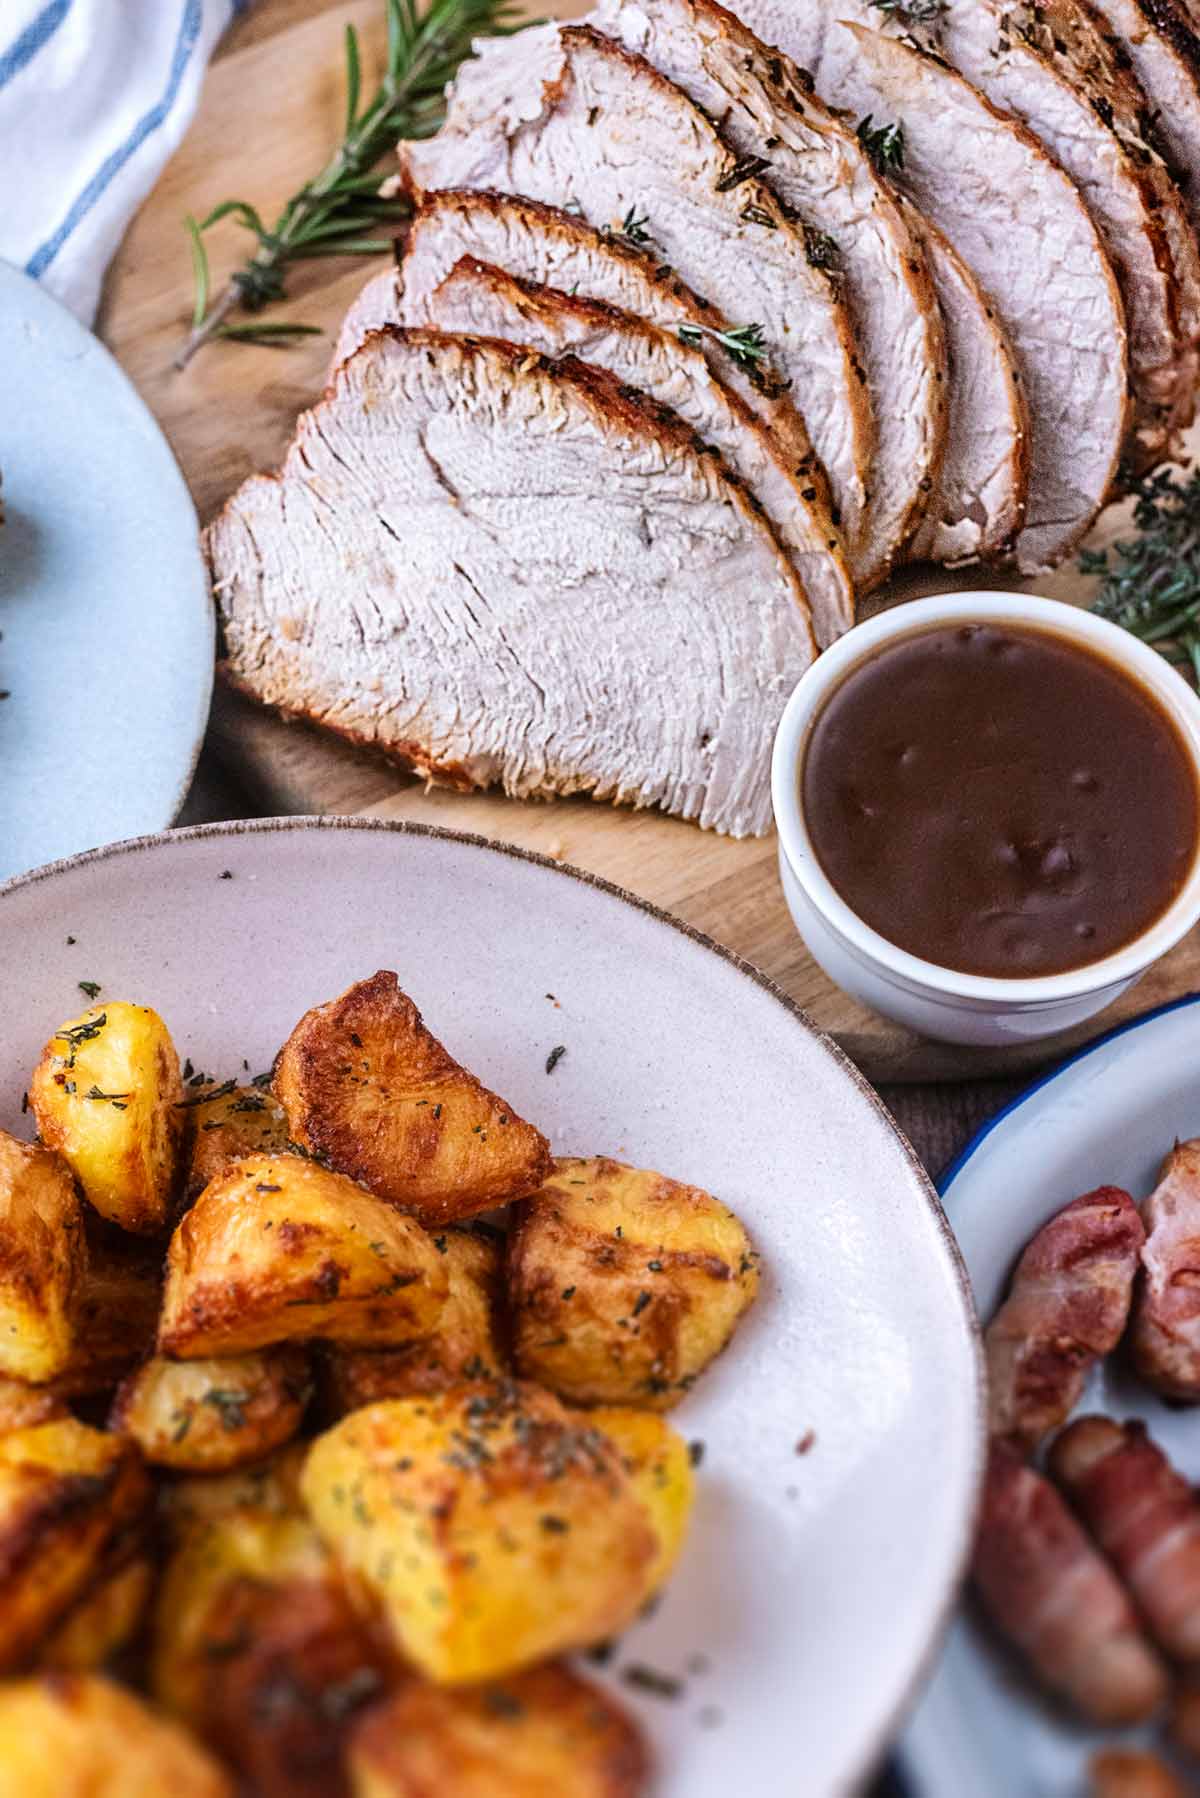 Slices of cooked turkey next to some roast potatoes, pigs in blankets and some gravy.